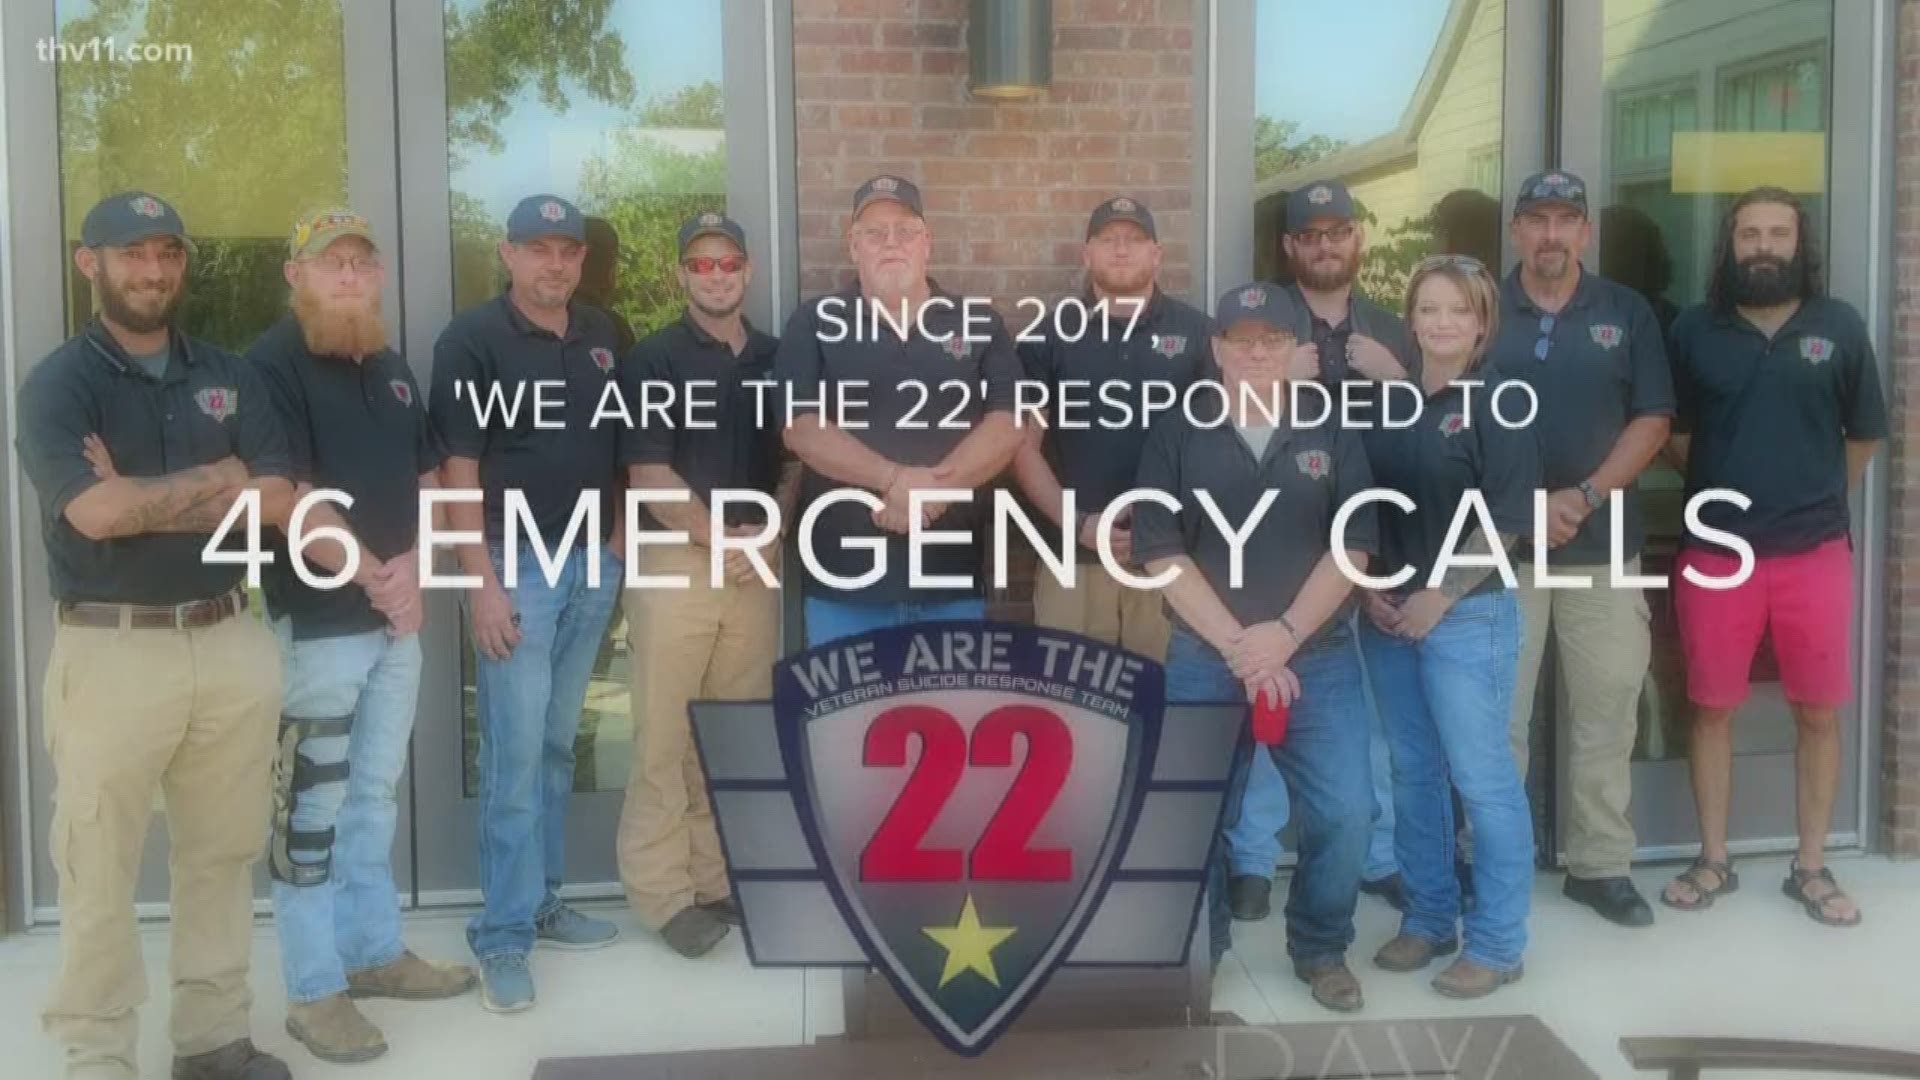 On average, nearly 22 veterans die from suicide per day nationwide. This is where the group 'We Are 22' steps in - working to bring that number down to zero.